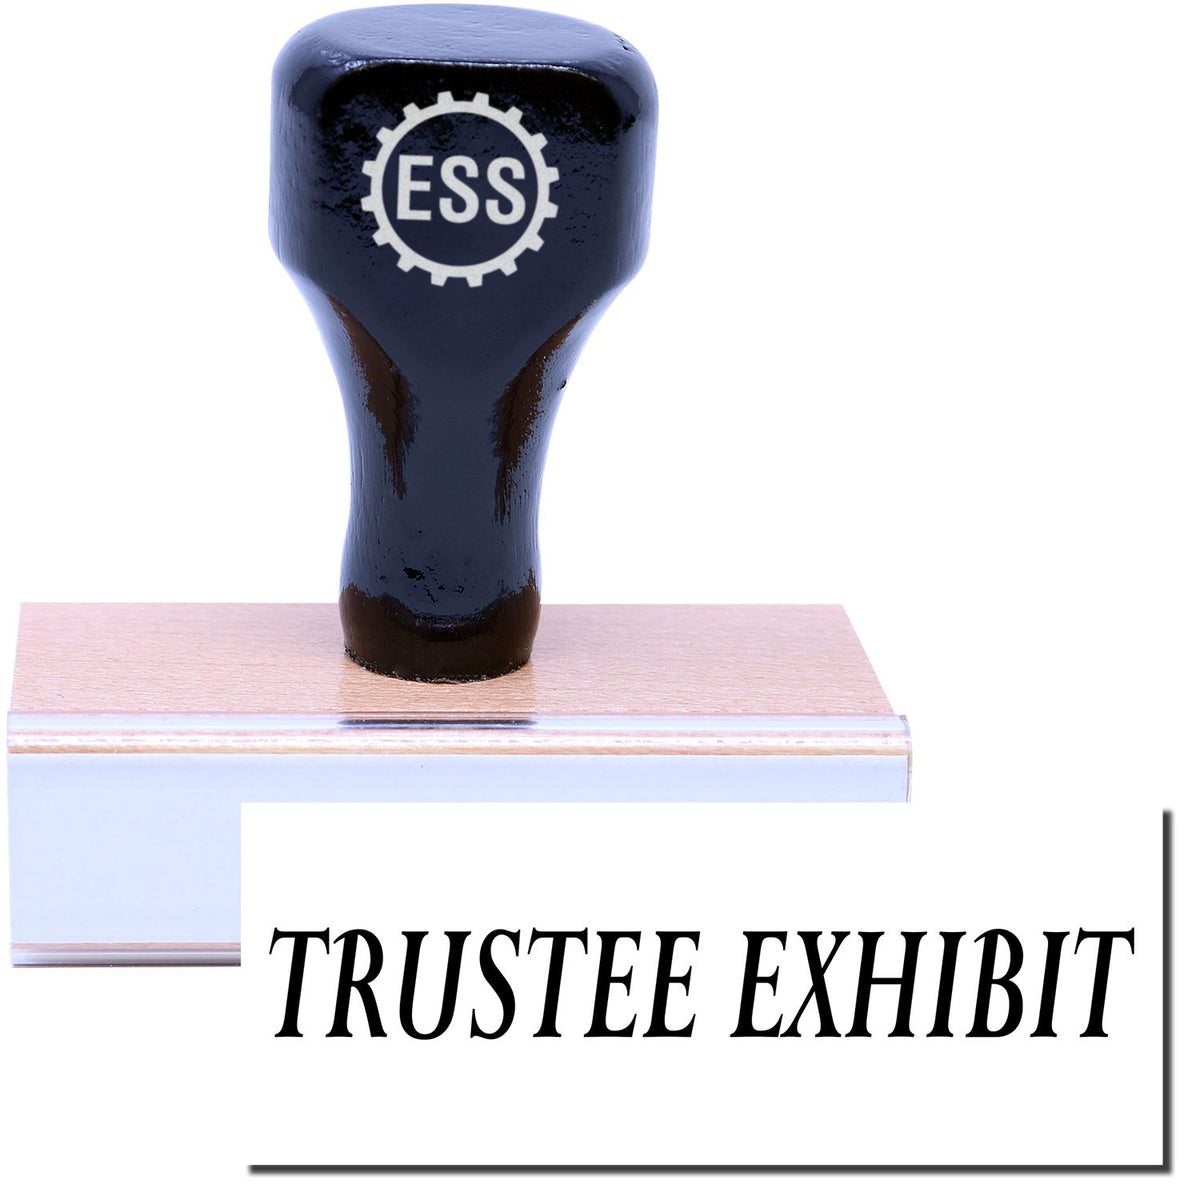 A stock office rubber stamp with a stamped image showing how the text &quot;TRUSTEE EXHIBIT&quot; in a large font is displayed after stamping.